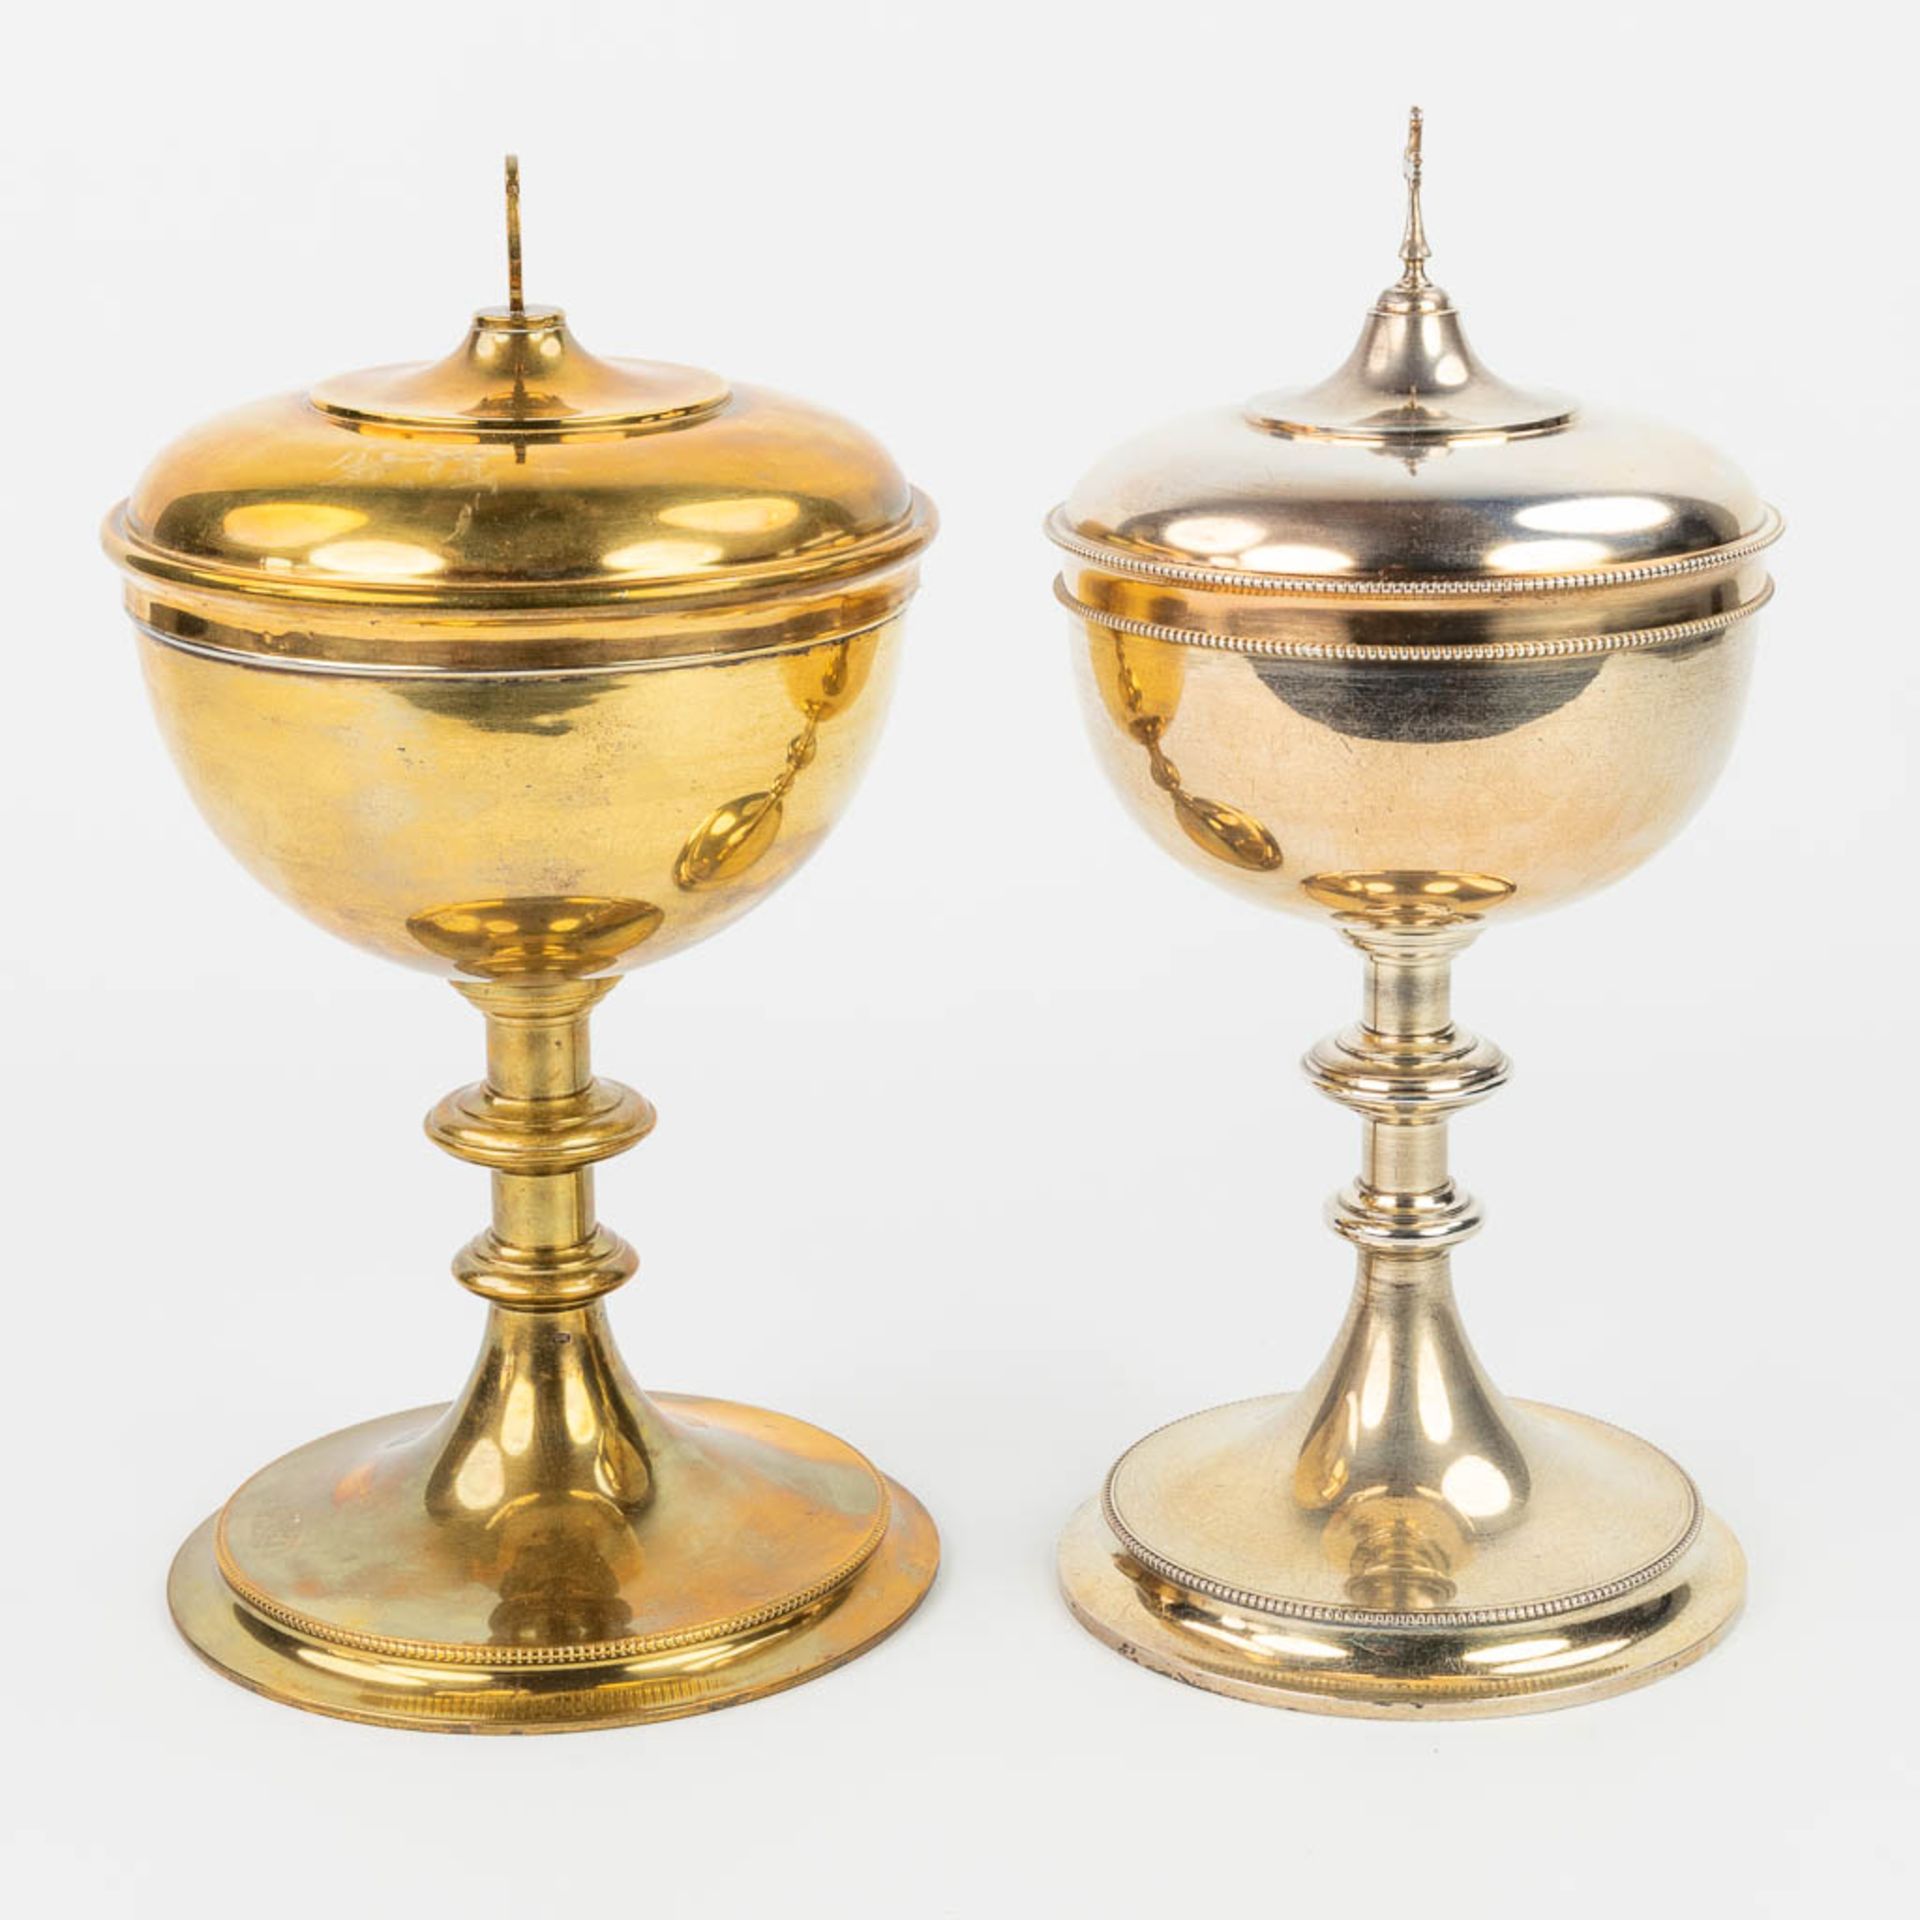 A collection of 4 large ciboria and a chalice made of silver and gold plated metal. - Image 22 of 24